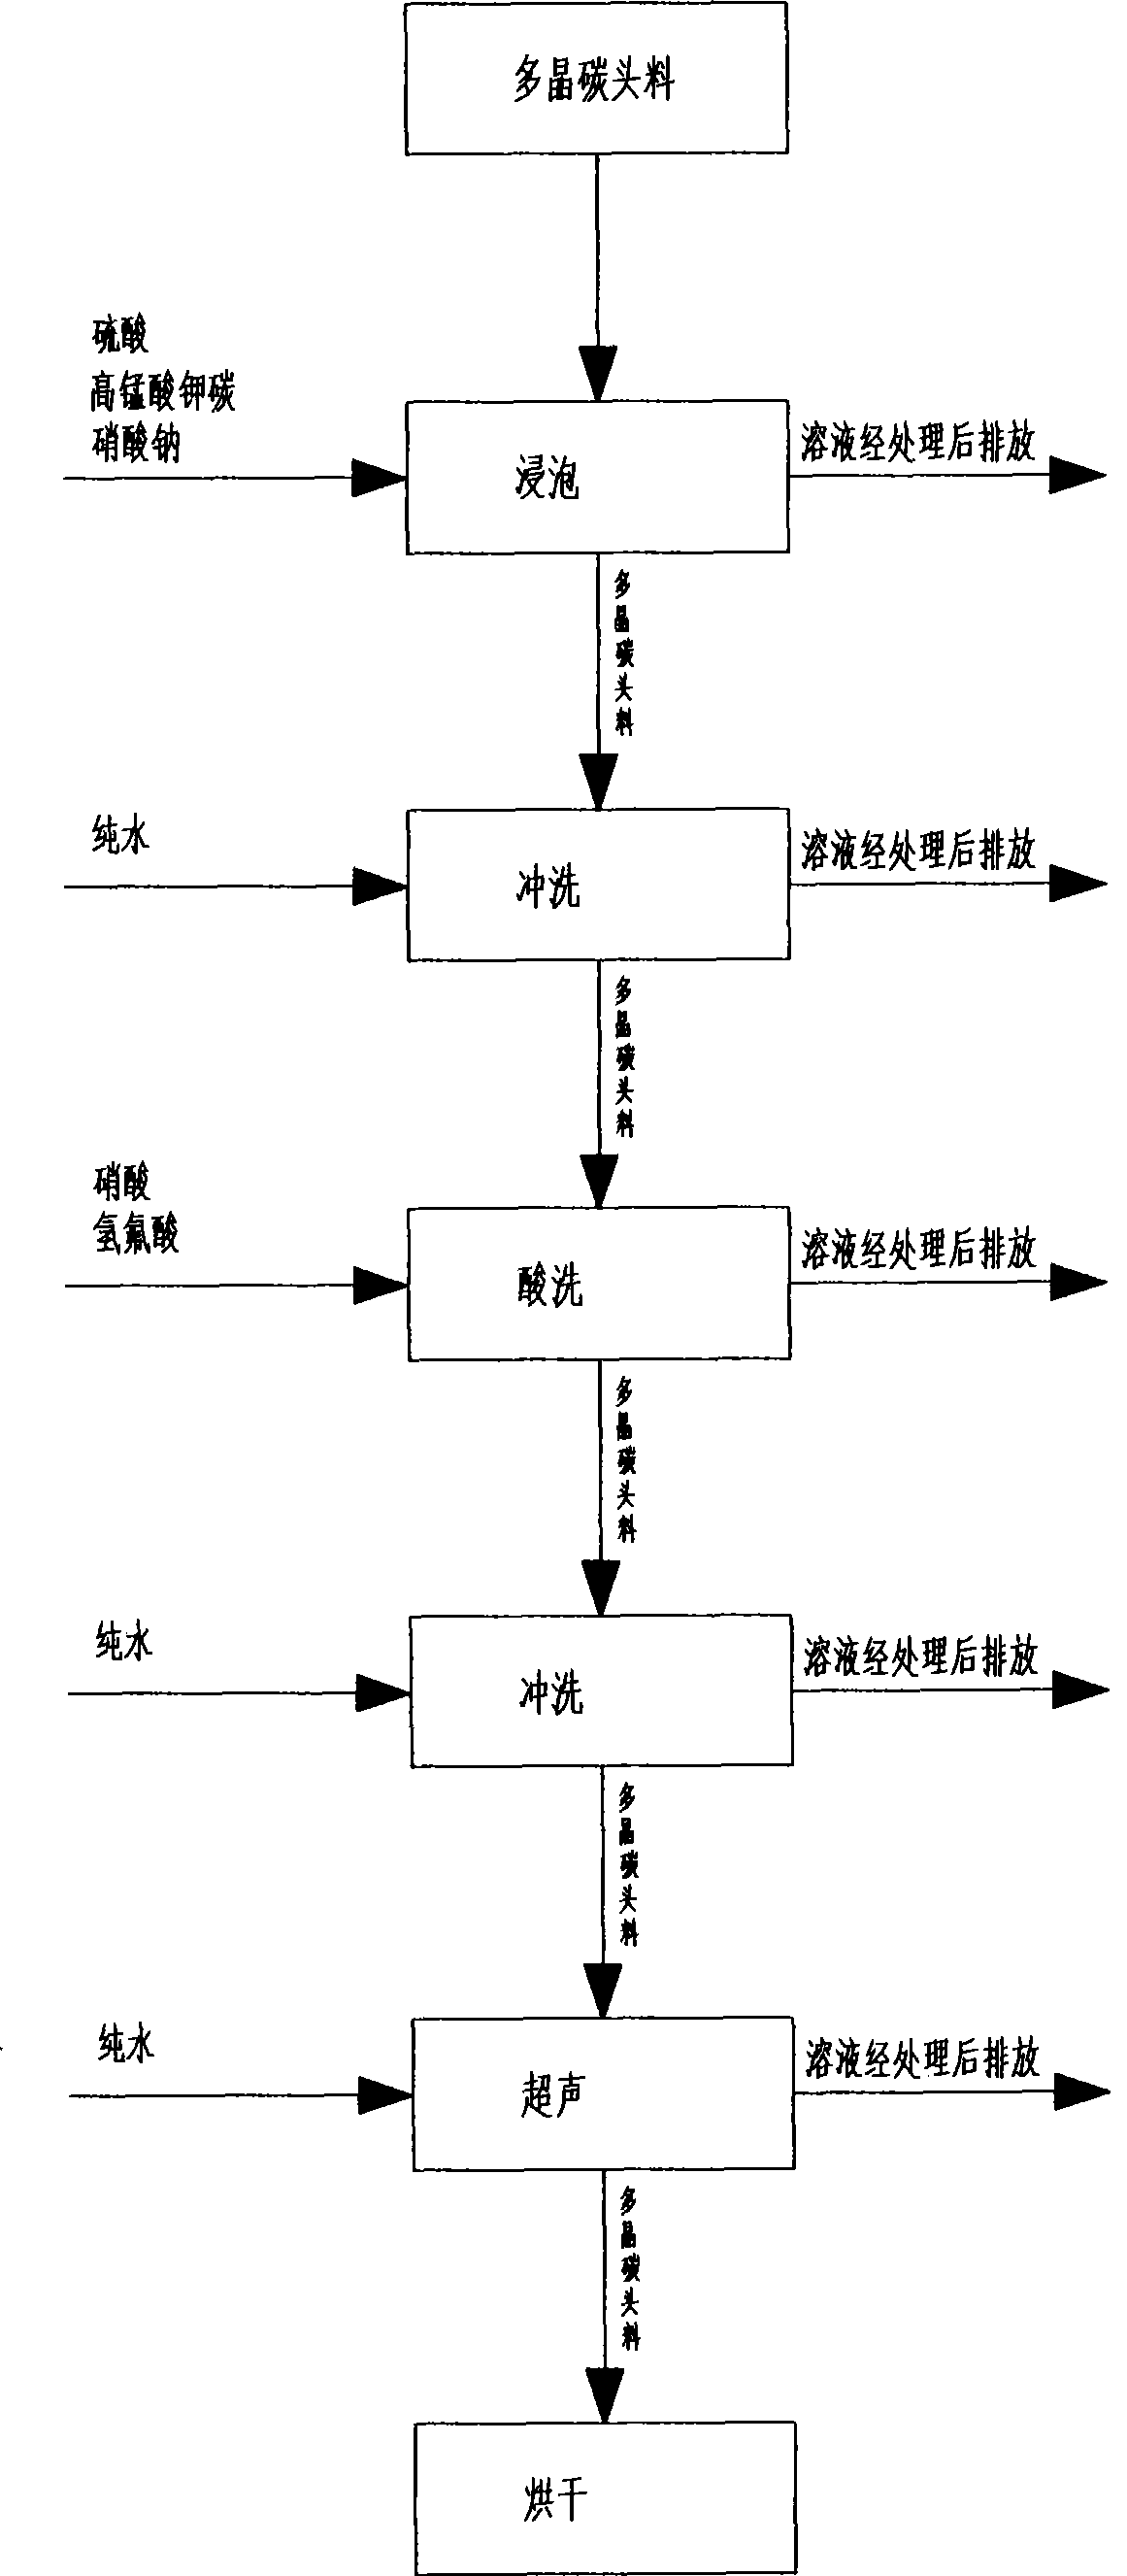 Method for cleaning polycrystal carbon head material